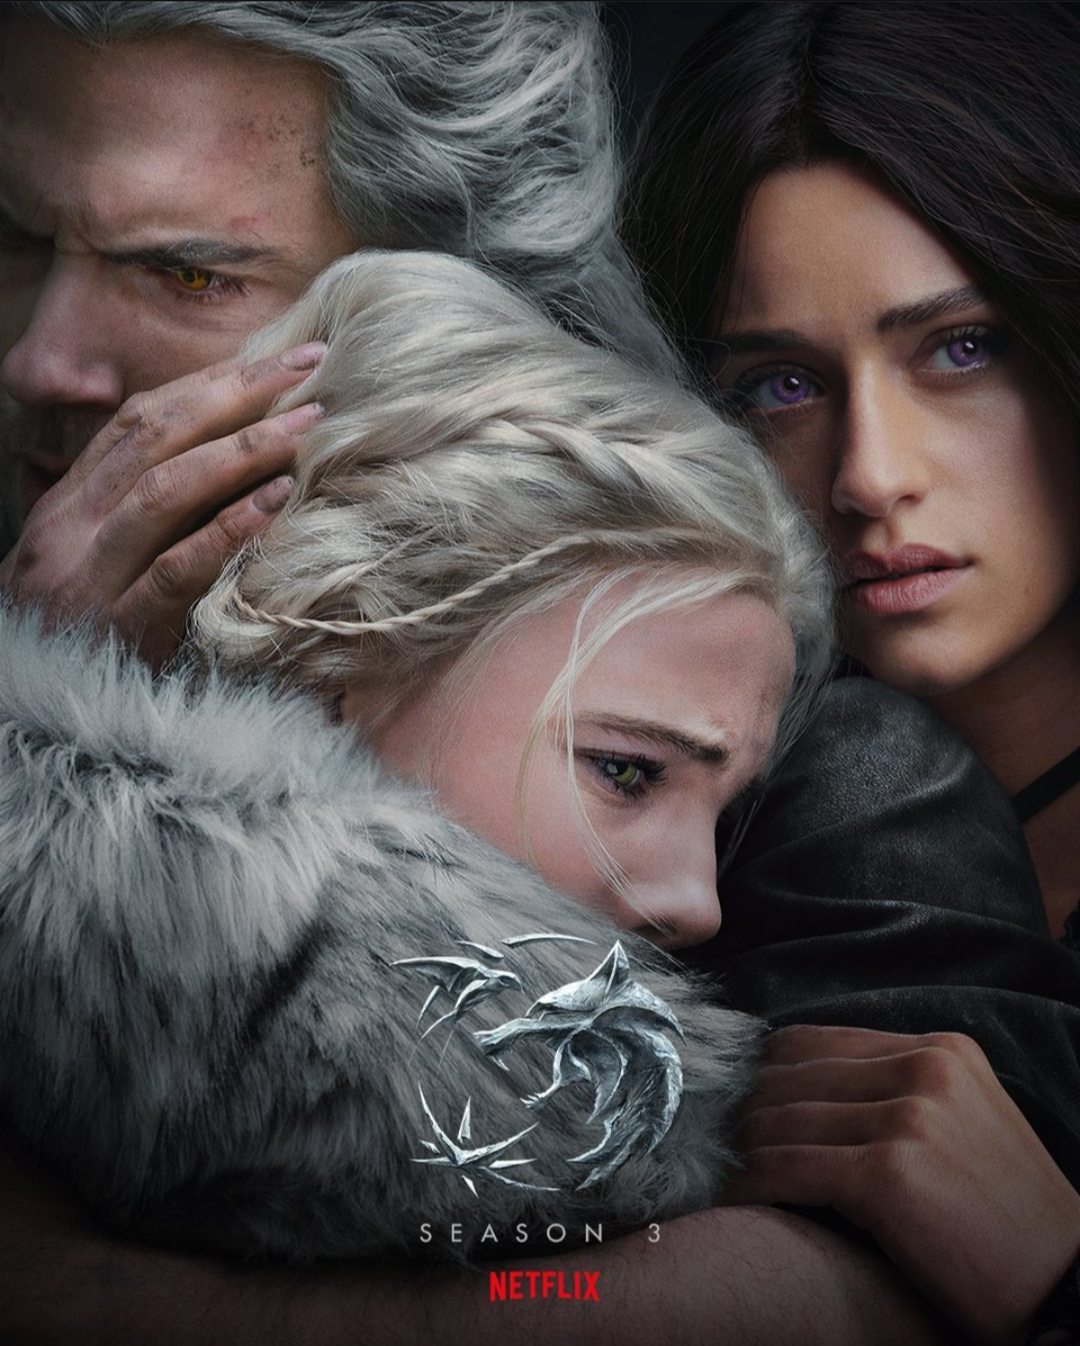 The Witcher producer reveals new details on Netflix series